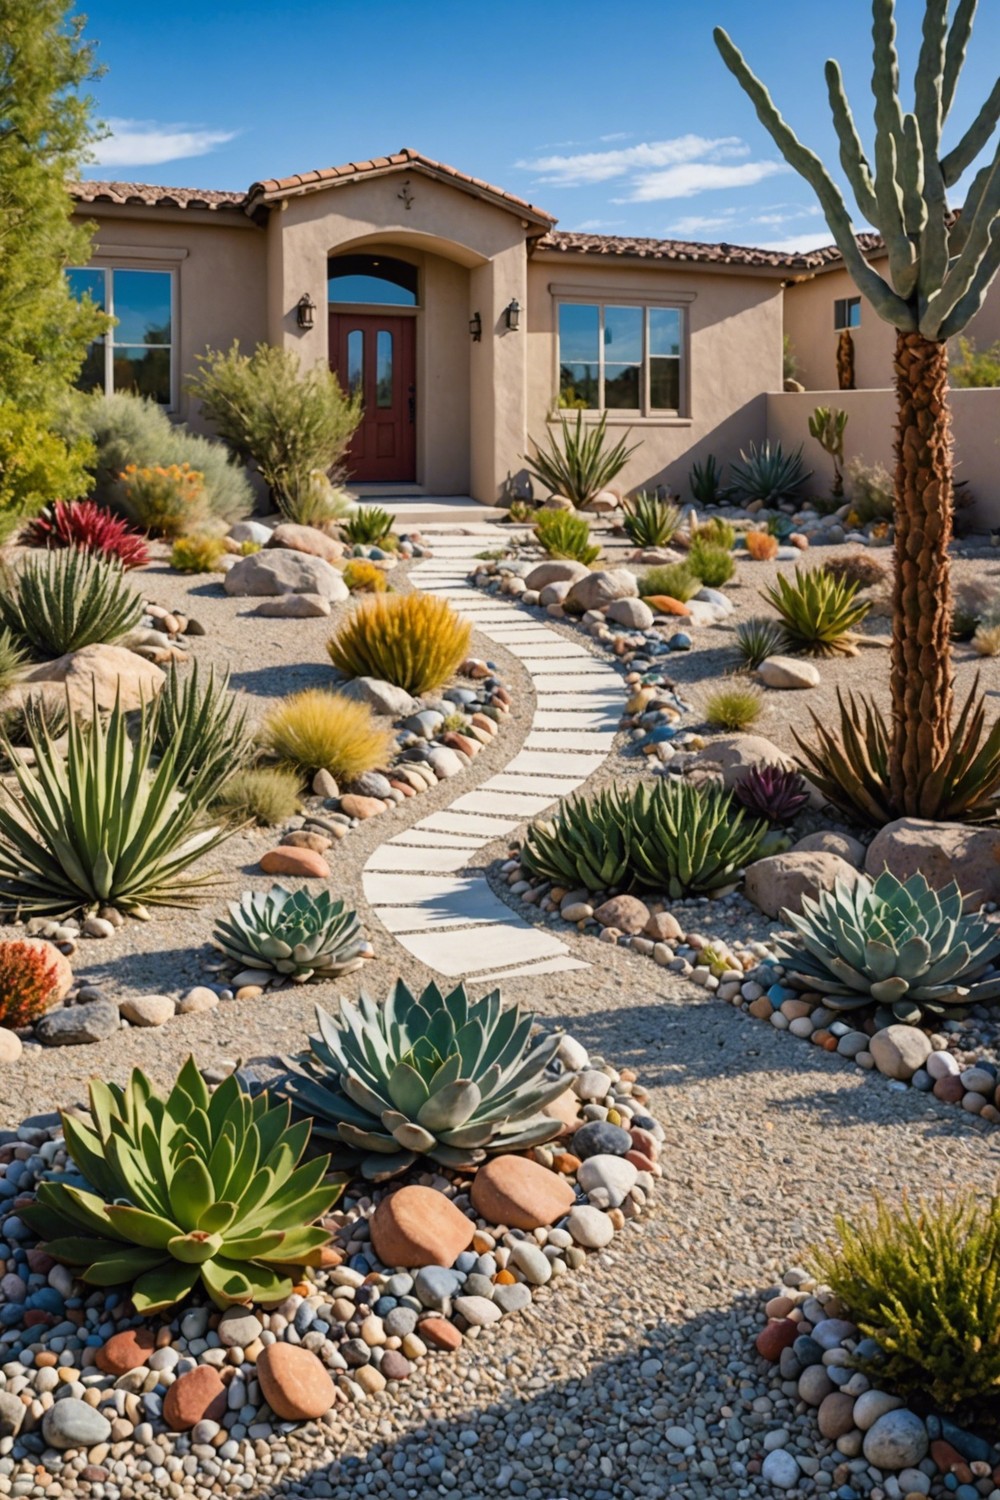 Gravel and Pebble Landscaping for a Low Maintenance Look